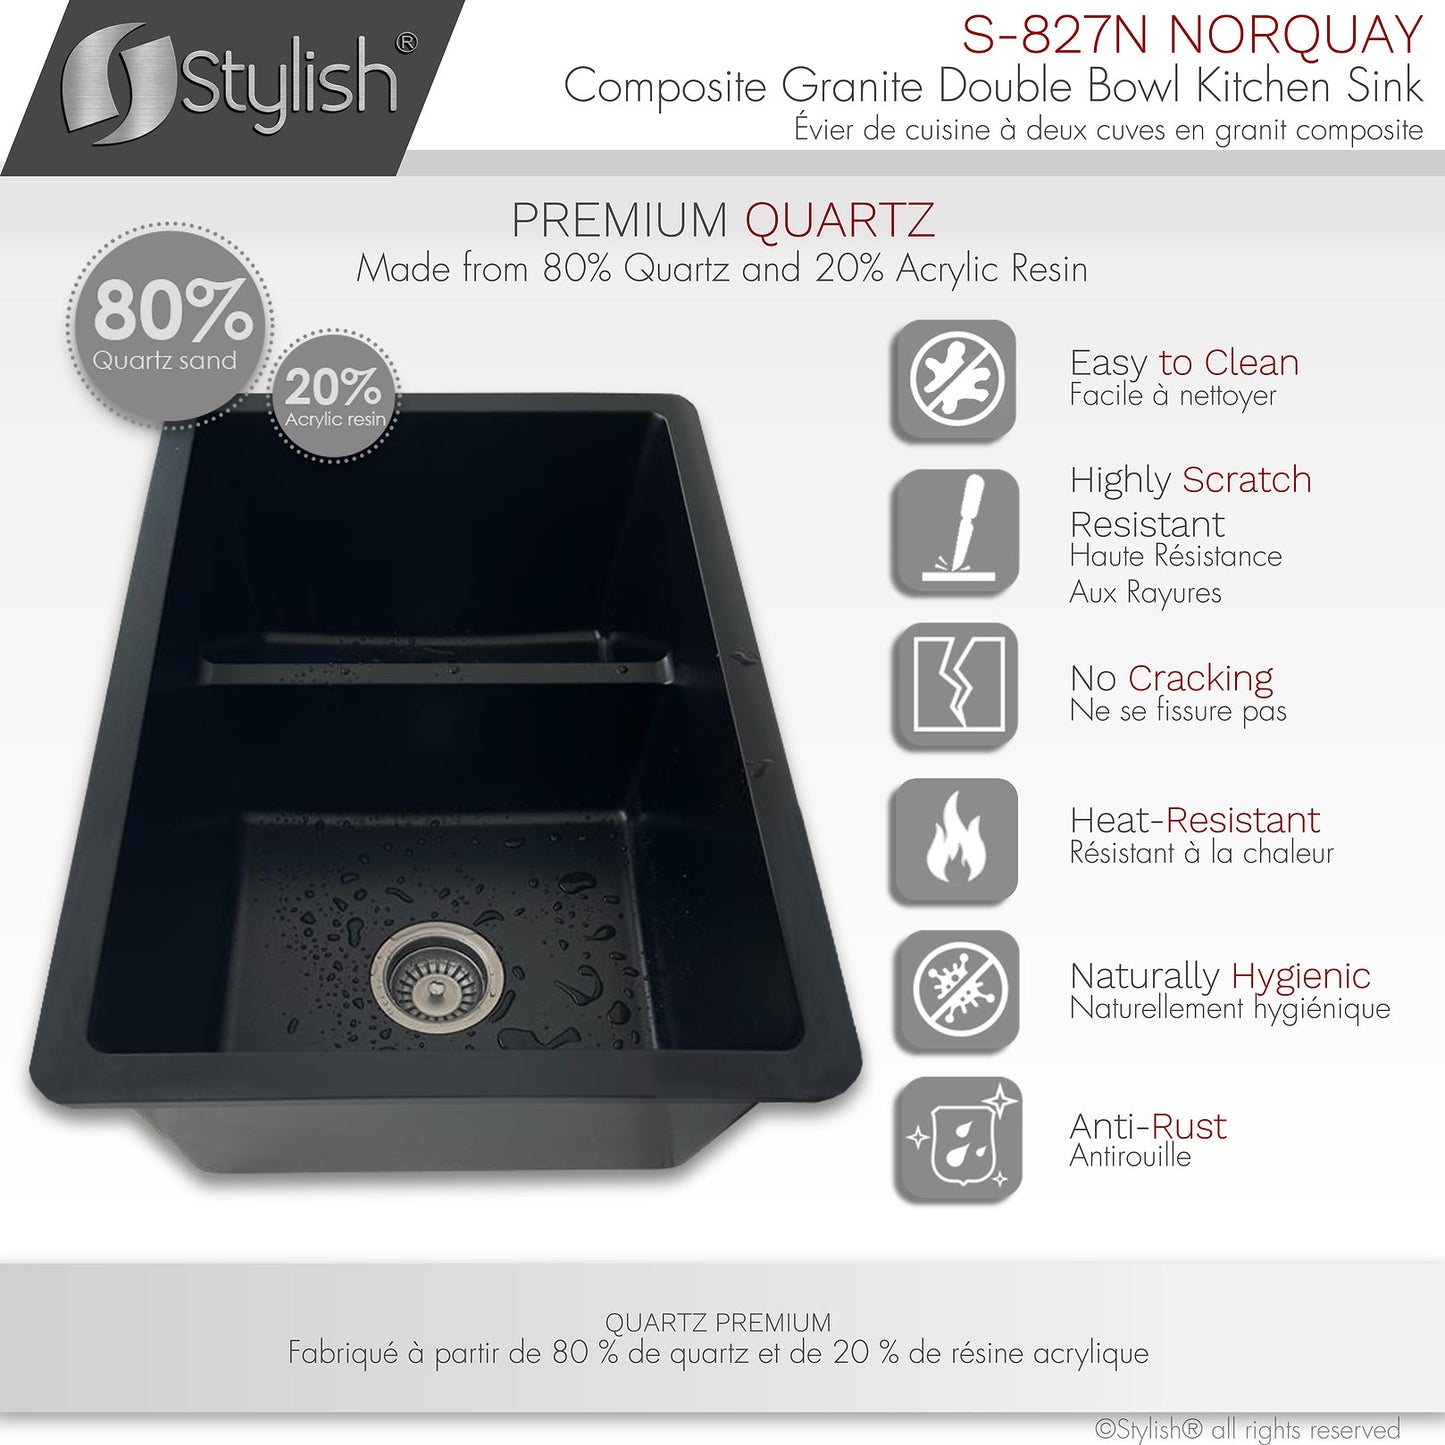 Stylish - 27 Inch Dual Mount 60/40 Double Bowl Granite Kitchen Sink With Strainer - S-827